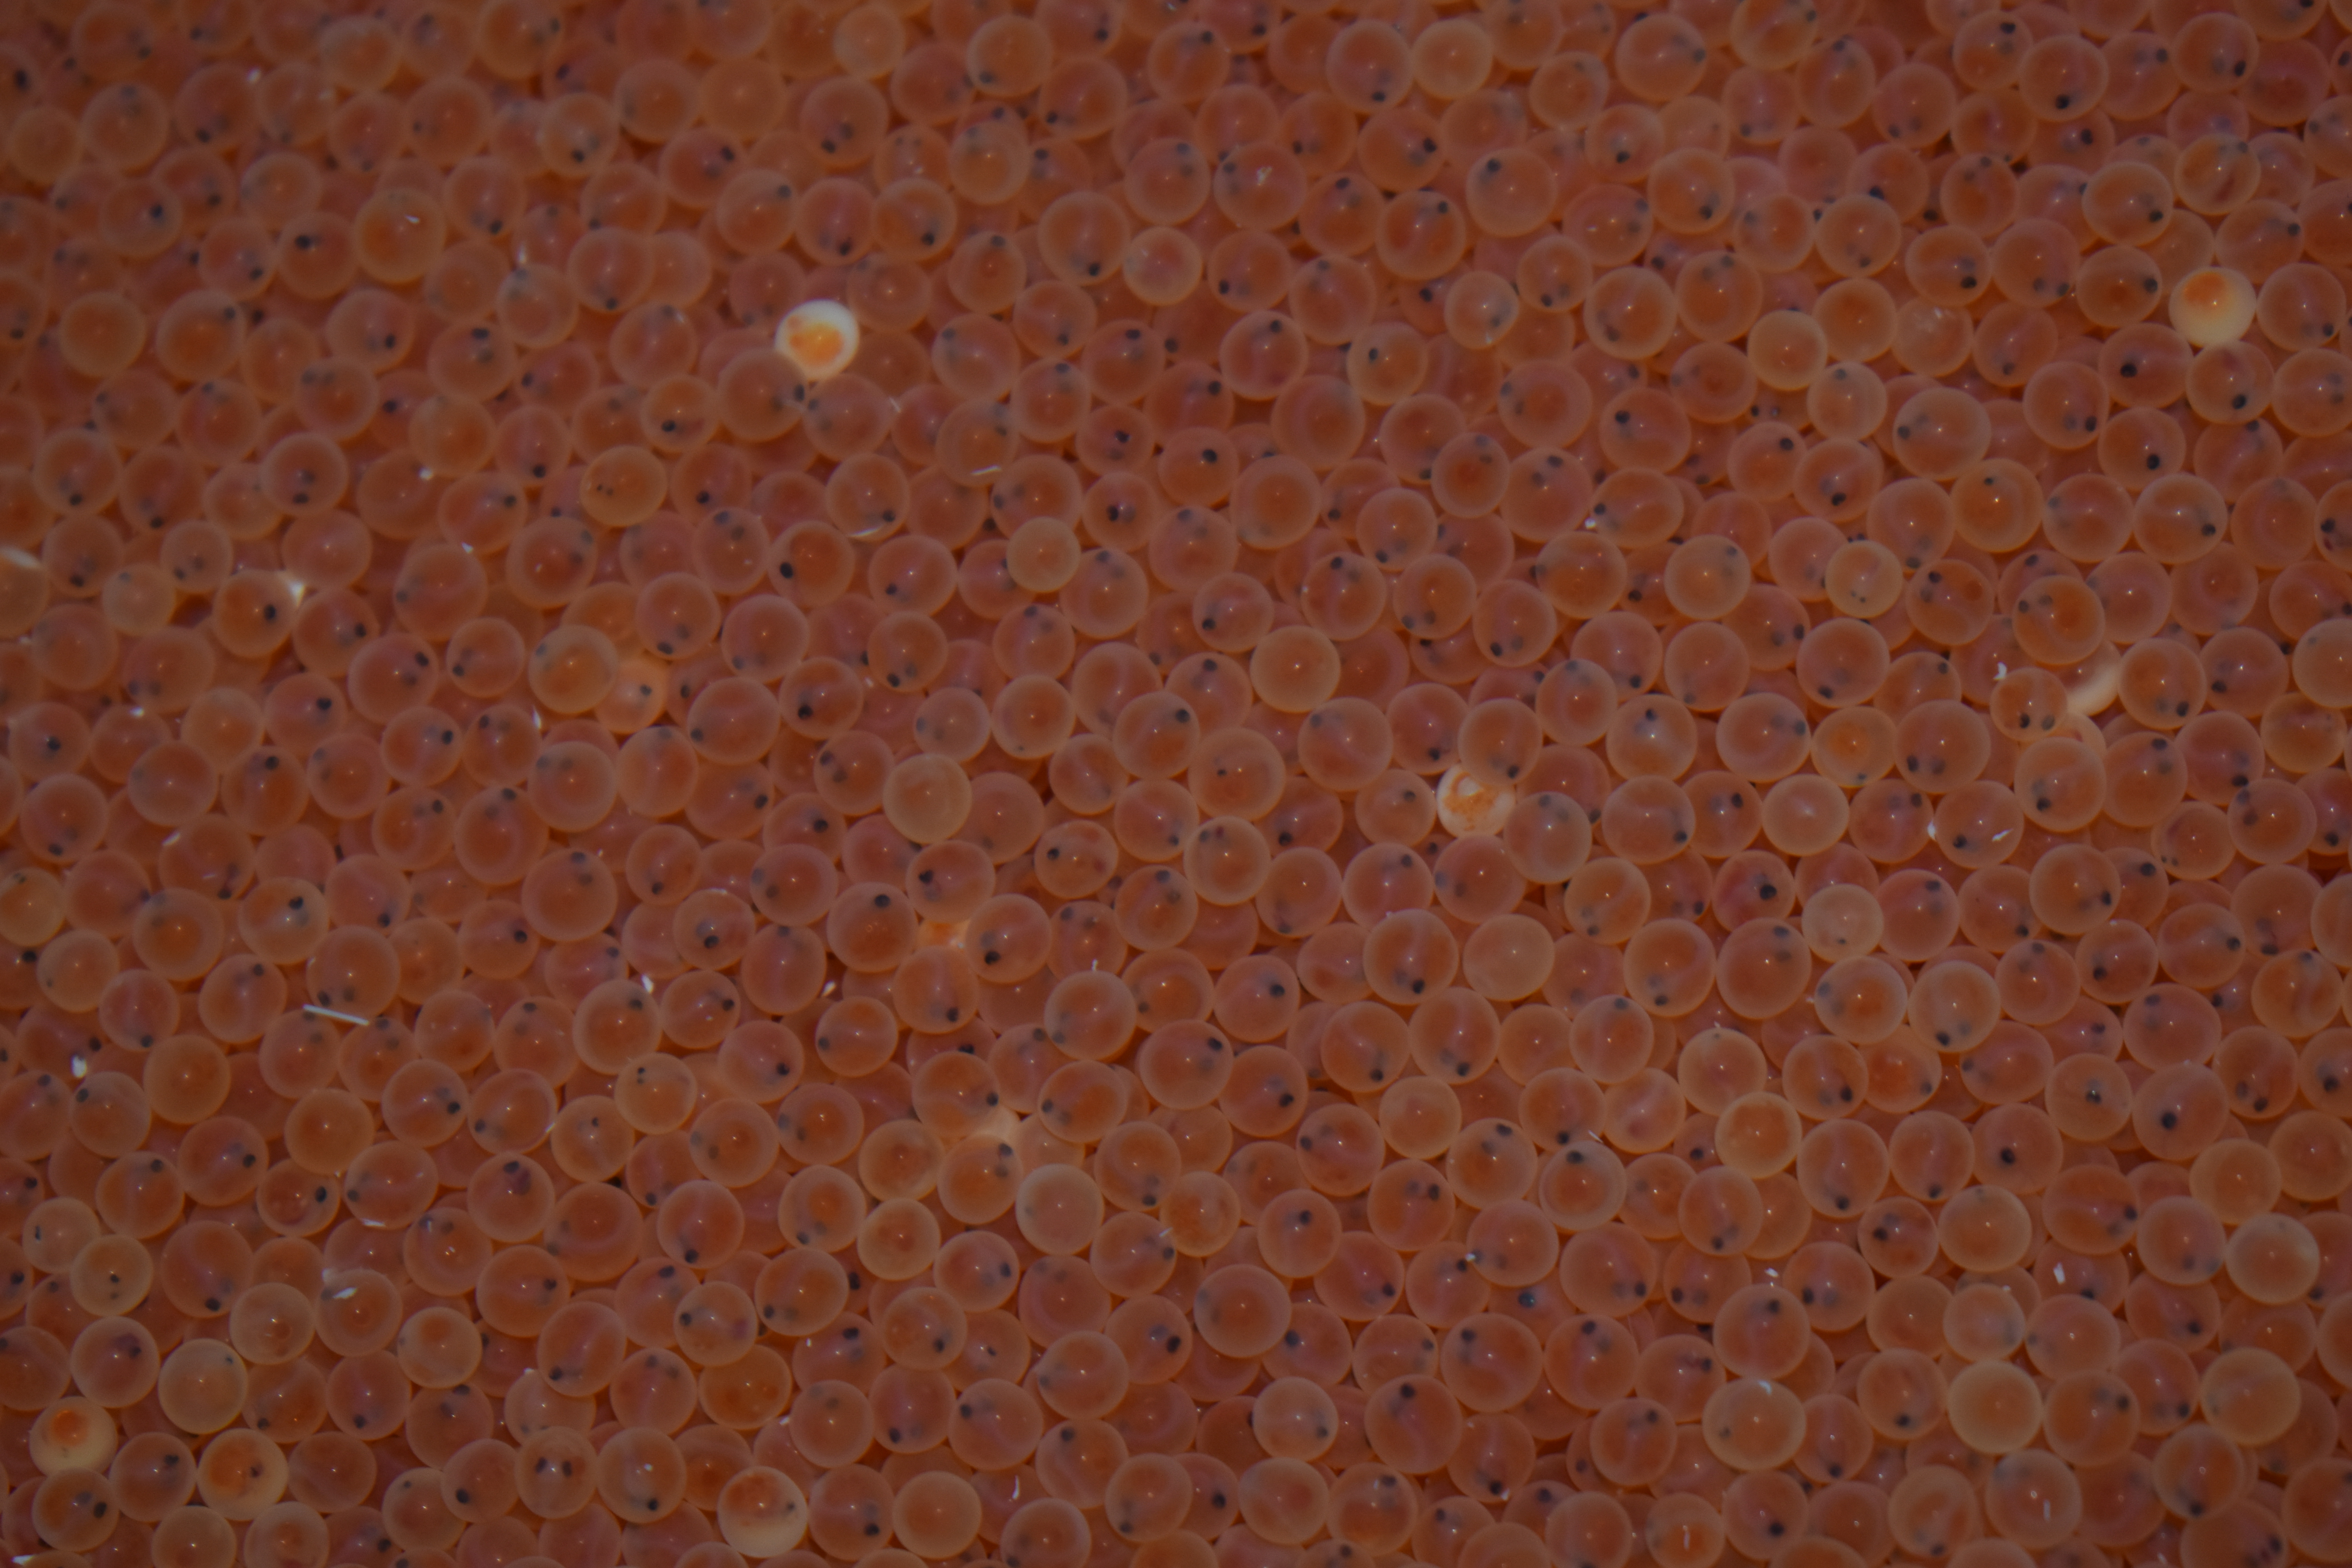 Numerous orange Rainbow trout eggs with visible dark eyespots in each egg